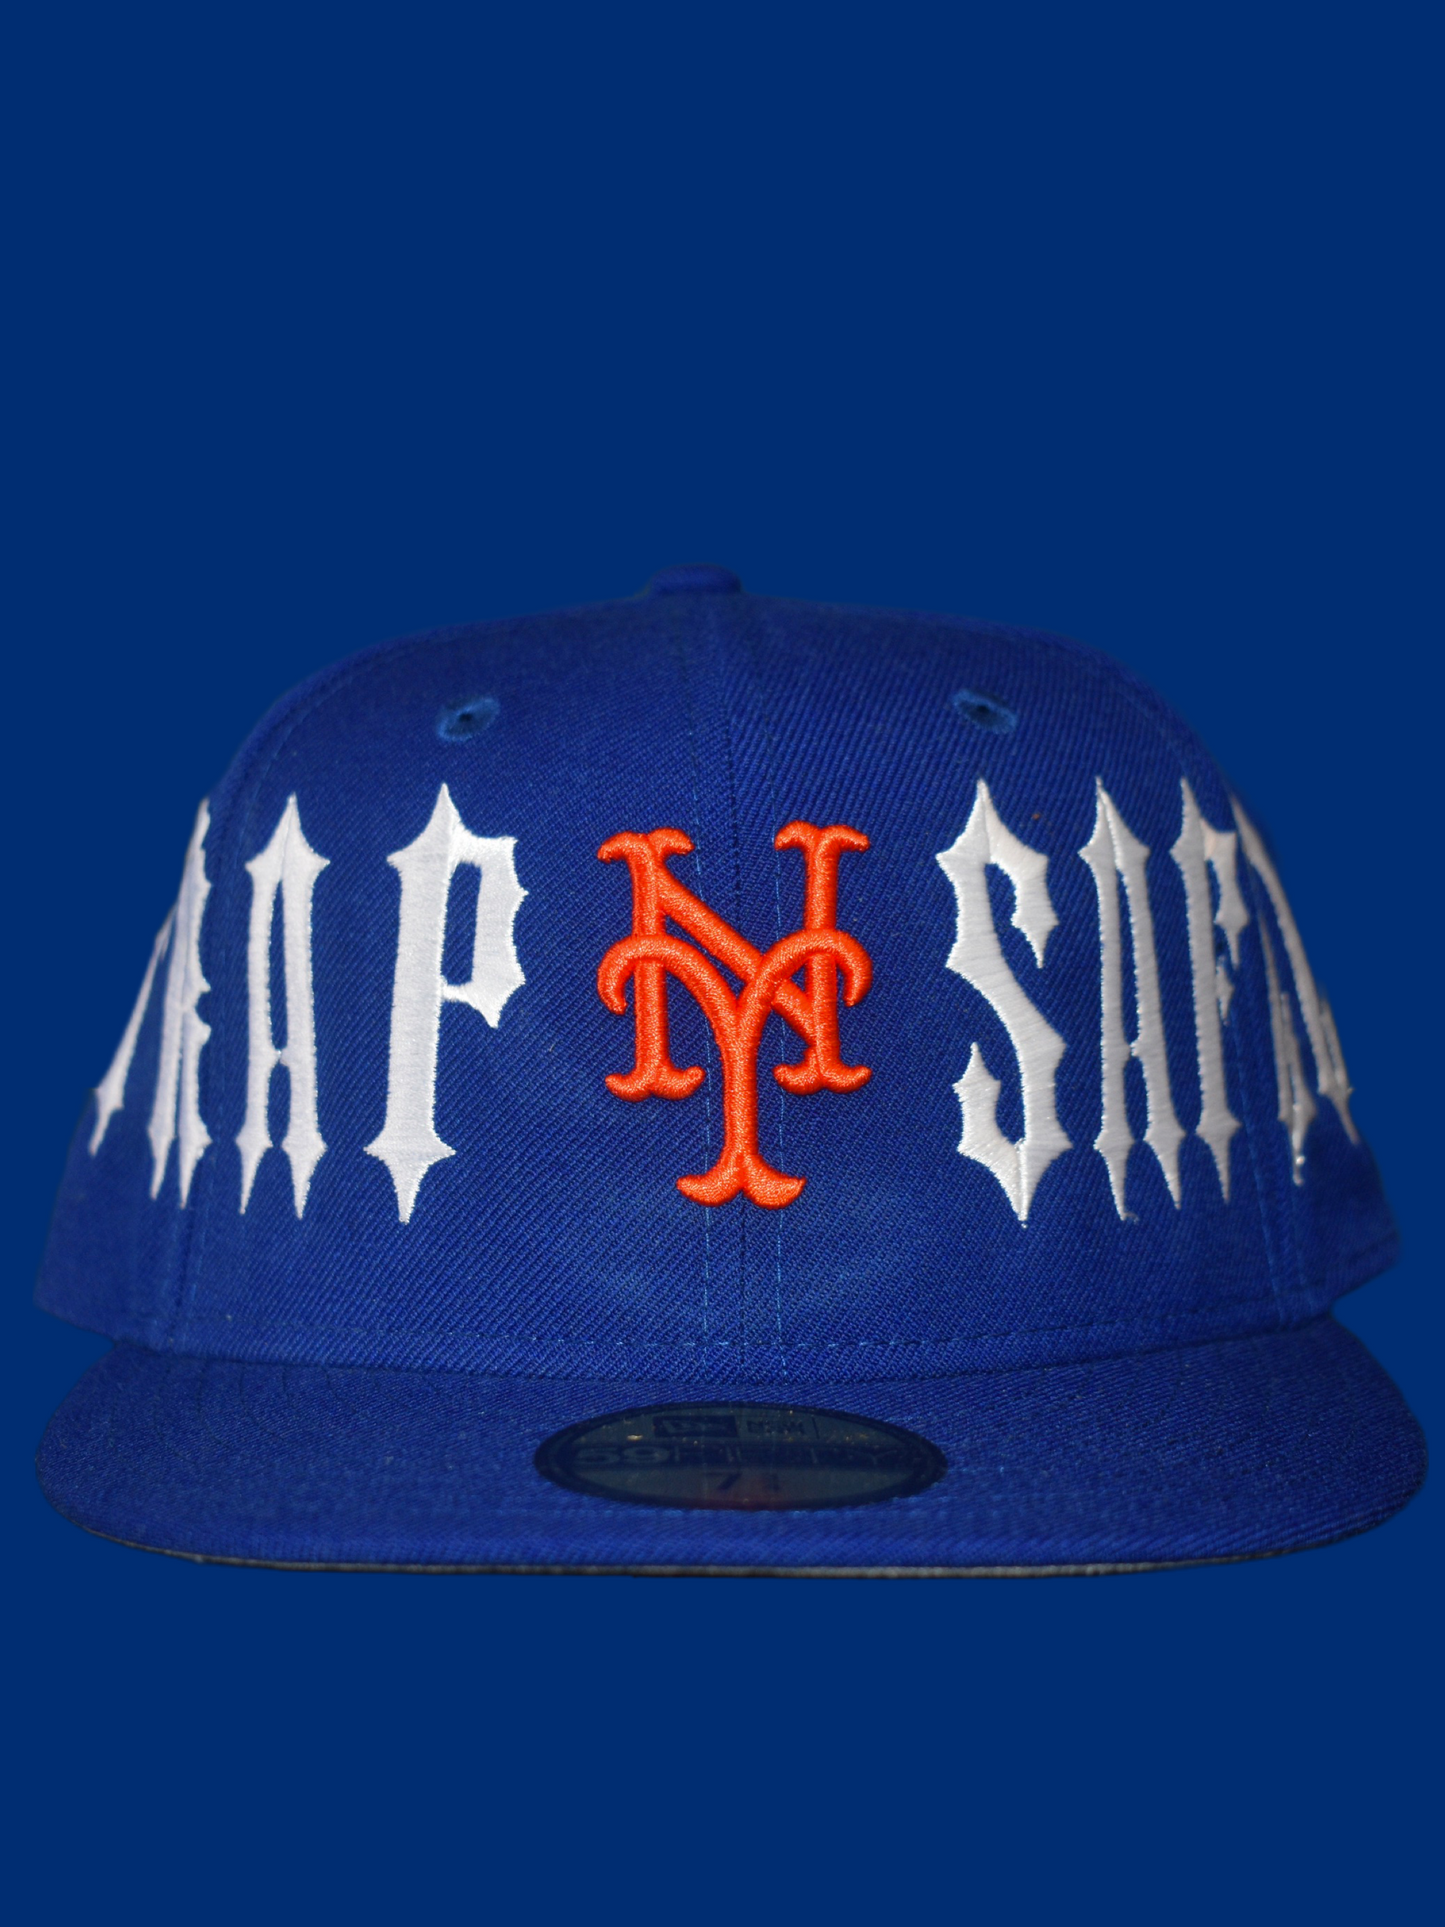 METS TSNY FITTED